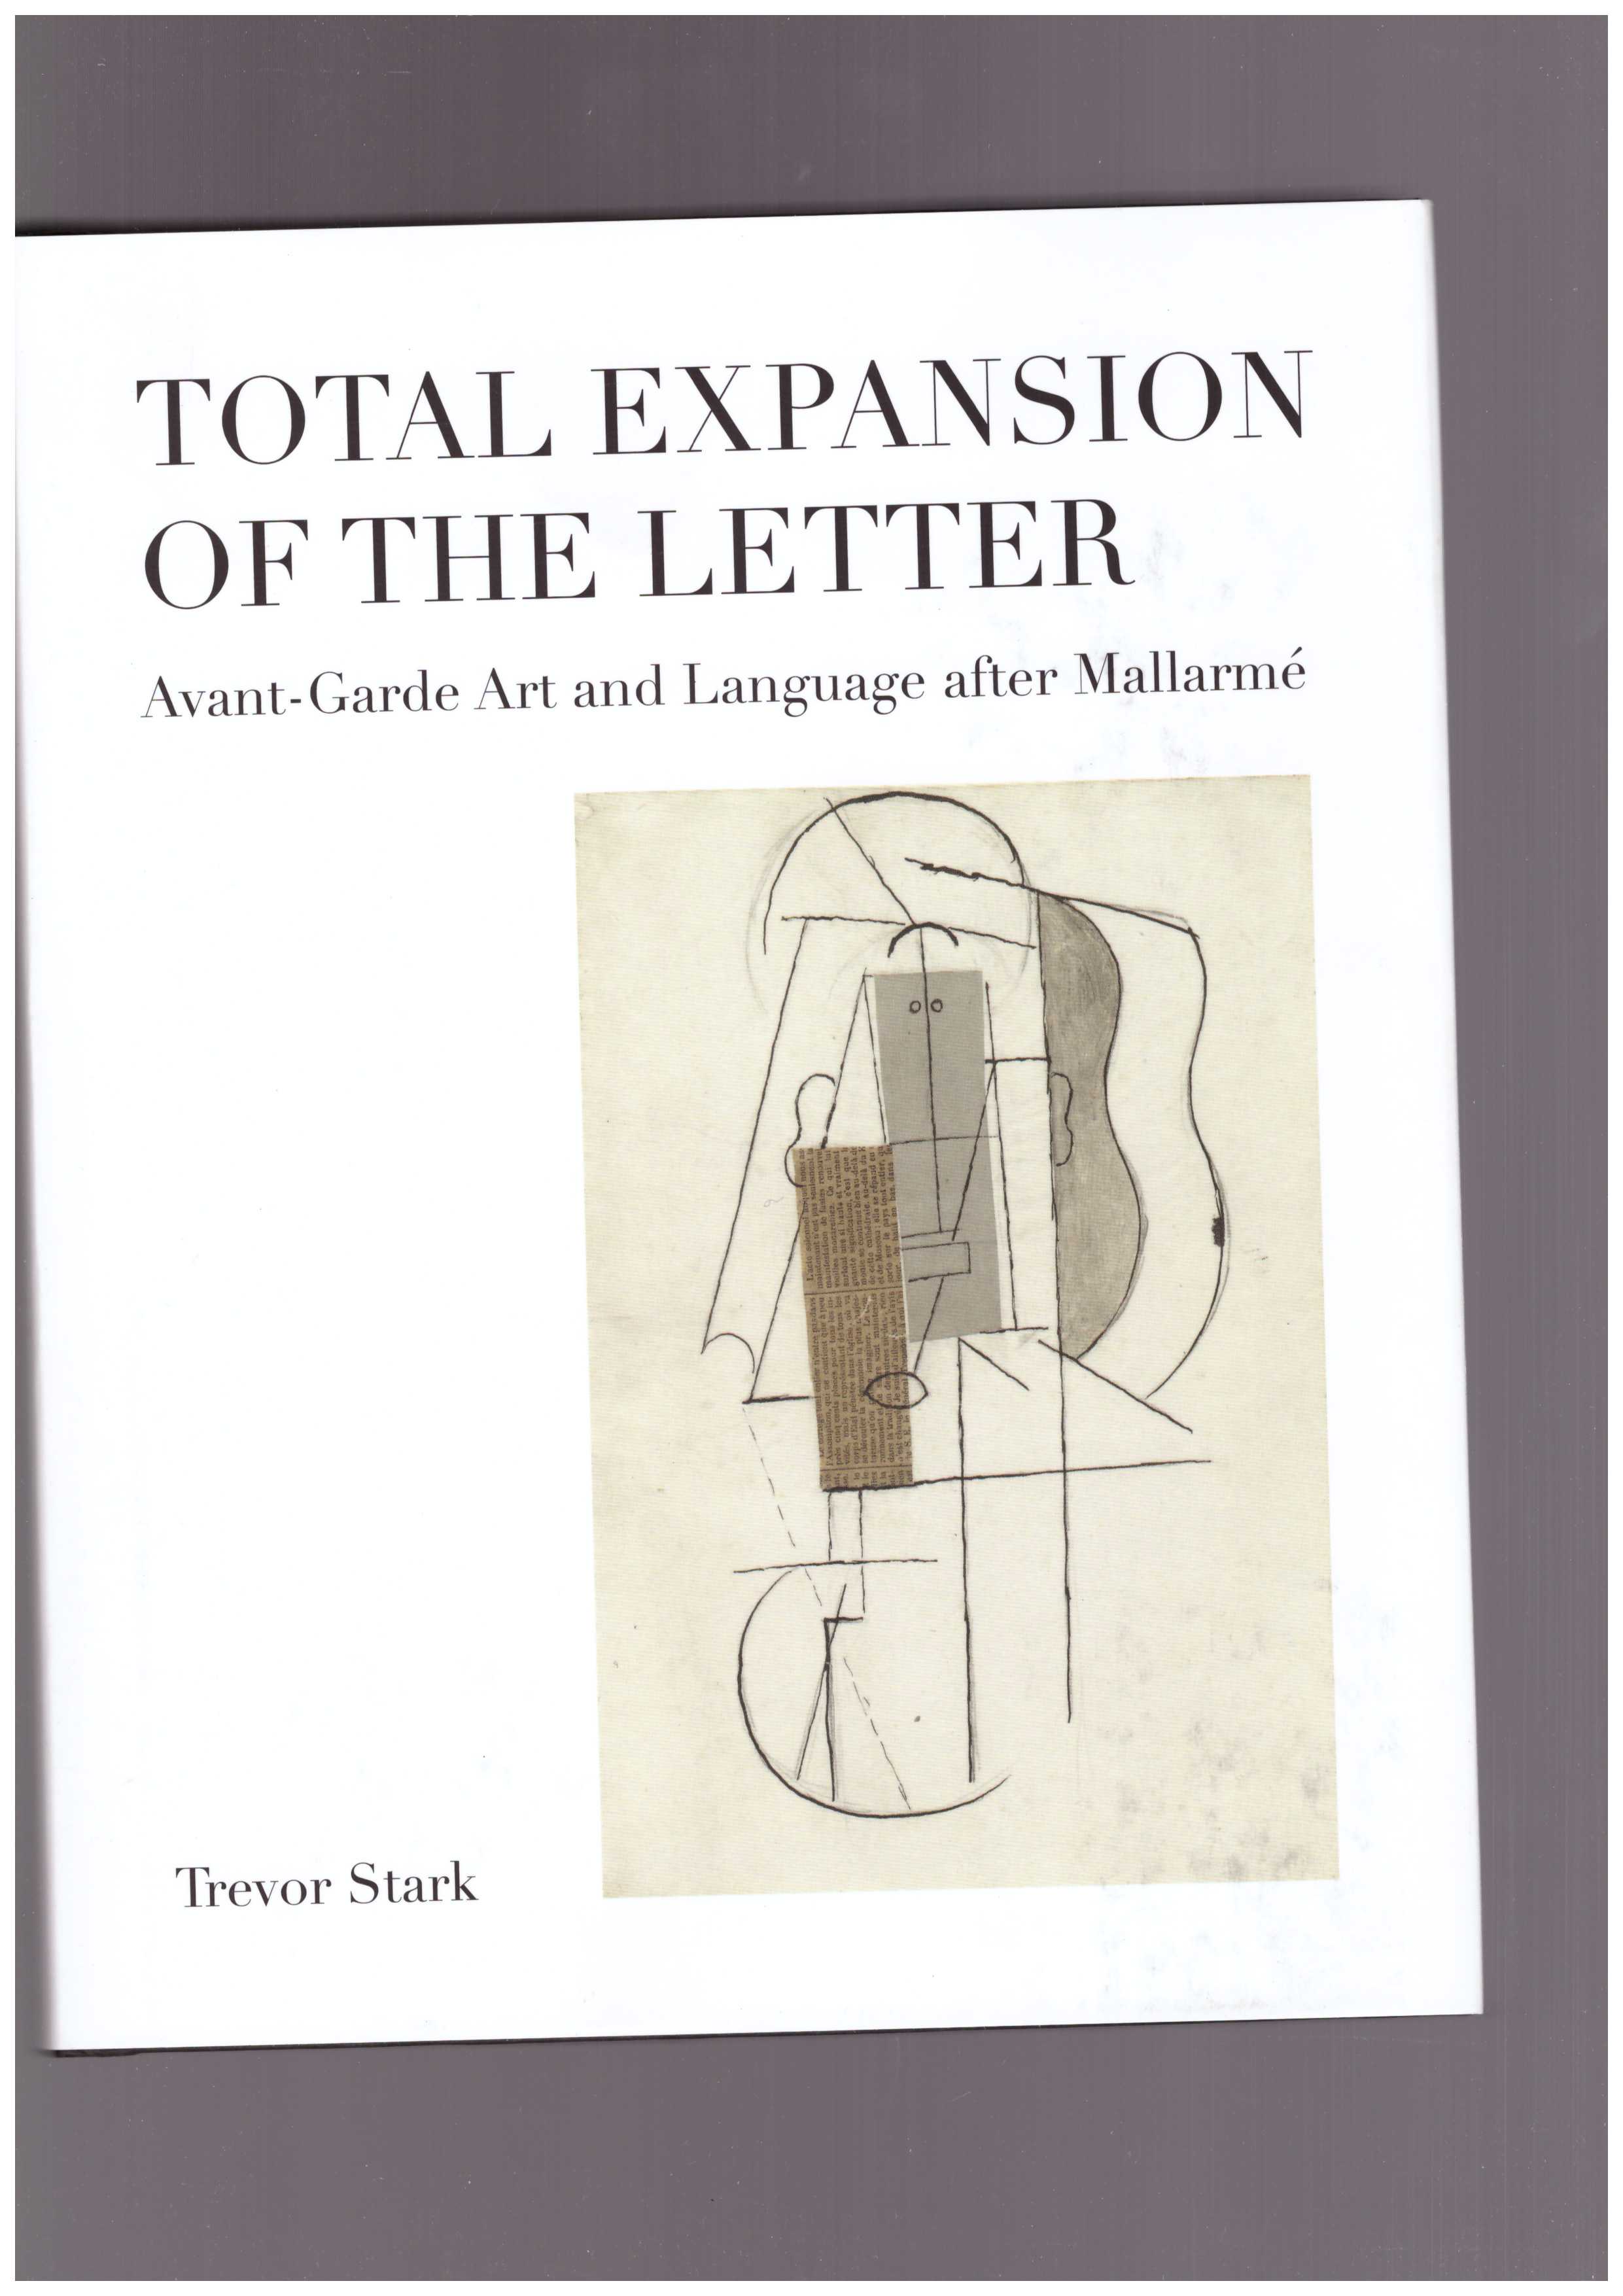 STARK, Trevor - Total Expansion of the Letter. Avant-Garde Art and Language After Mallarmé